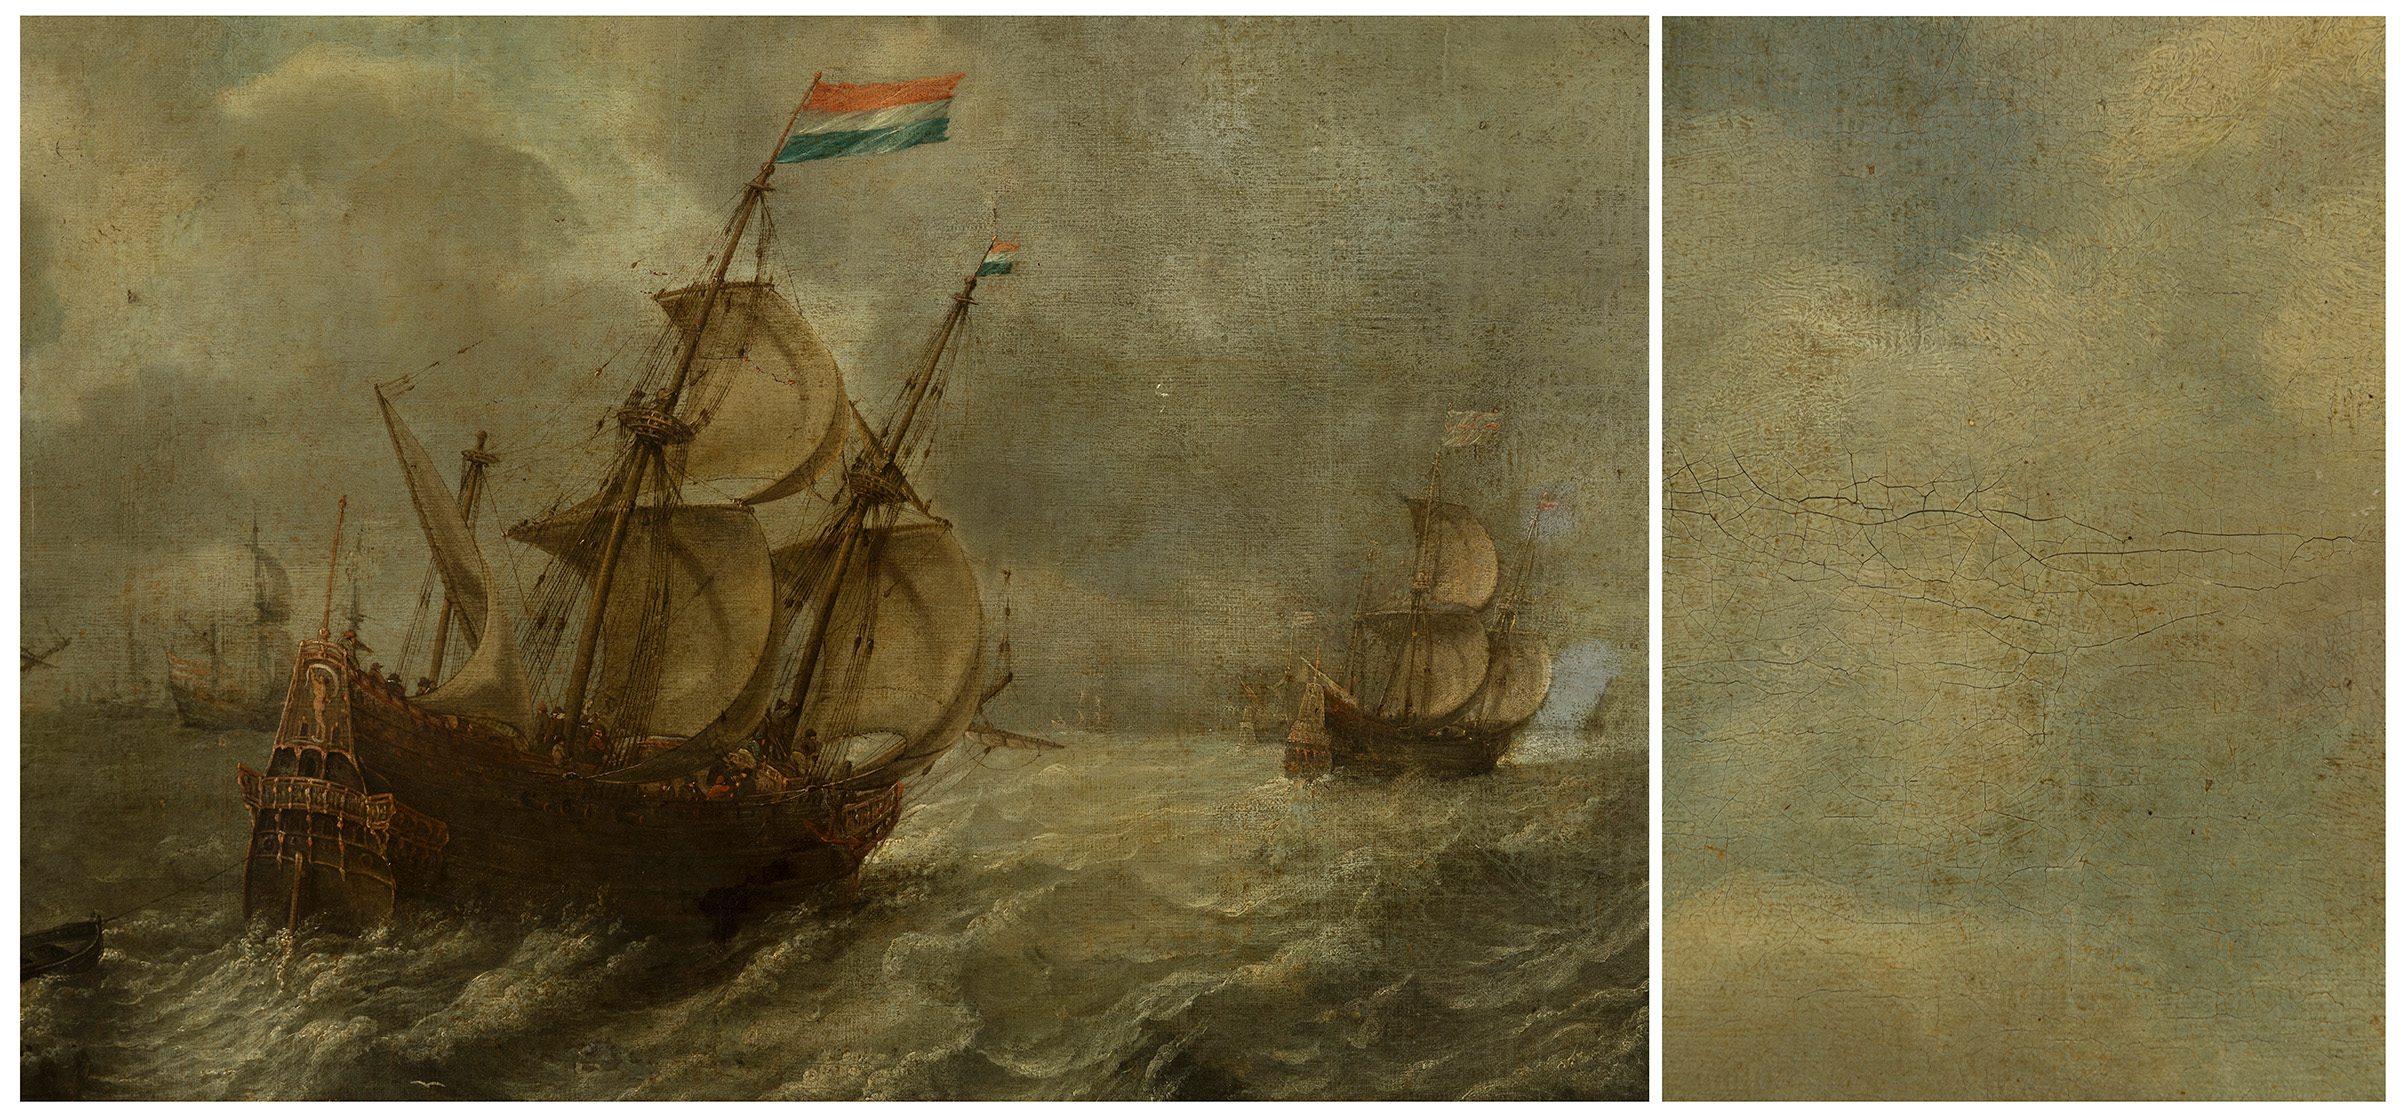 17th century Dutch school."Marina".Oil on canvas.Presents tasting of cleaning.It shows label on - Image 3 of 7